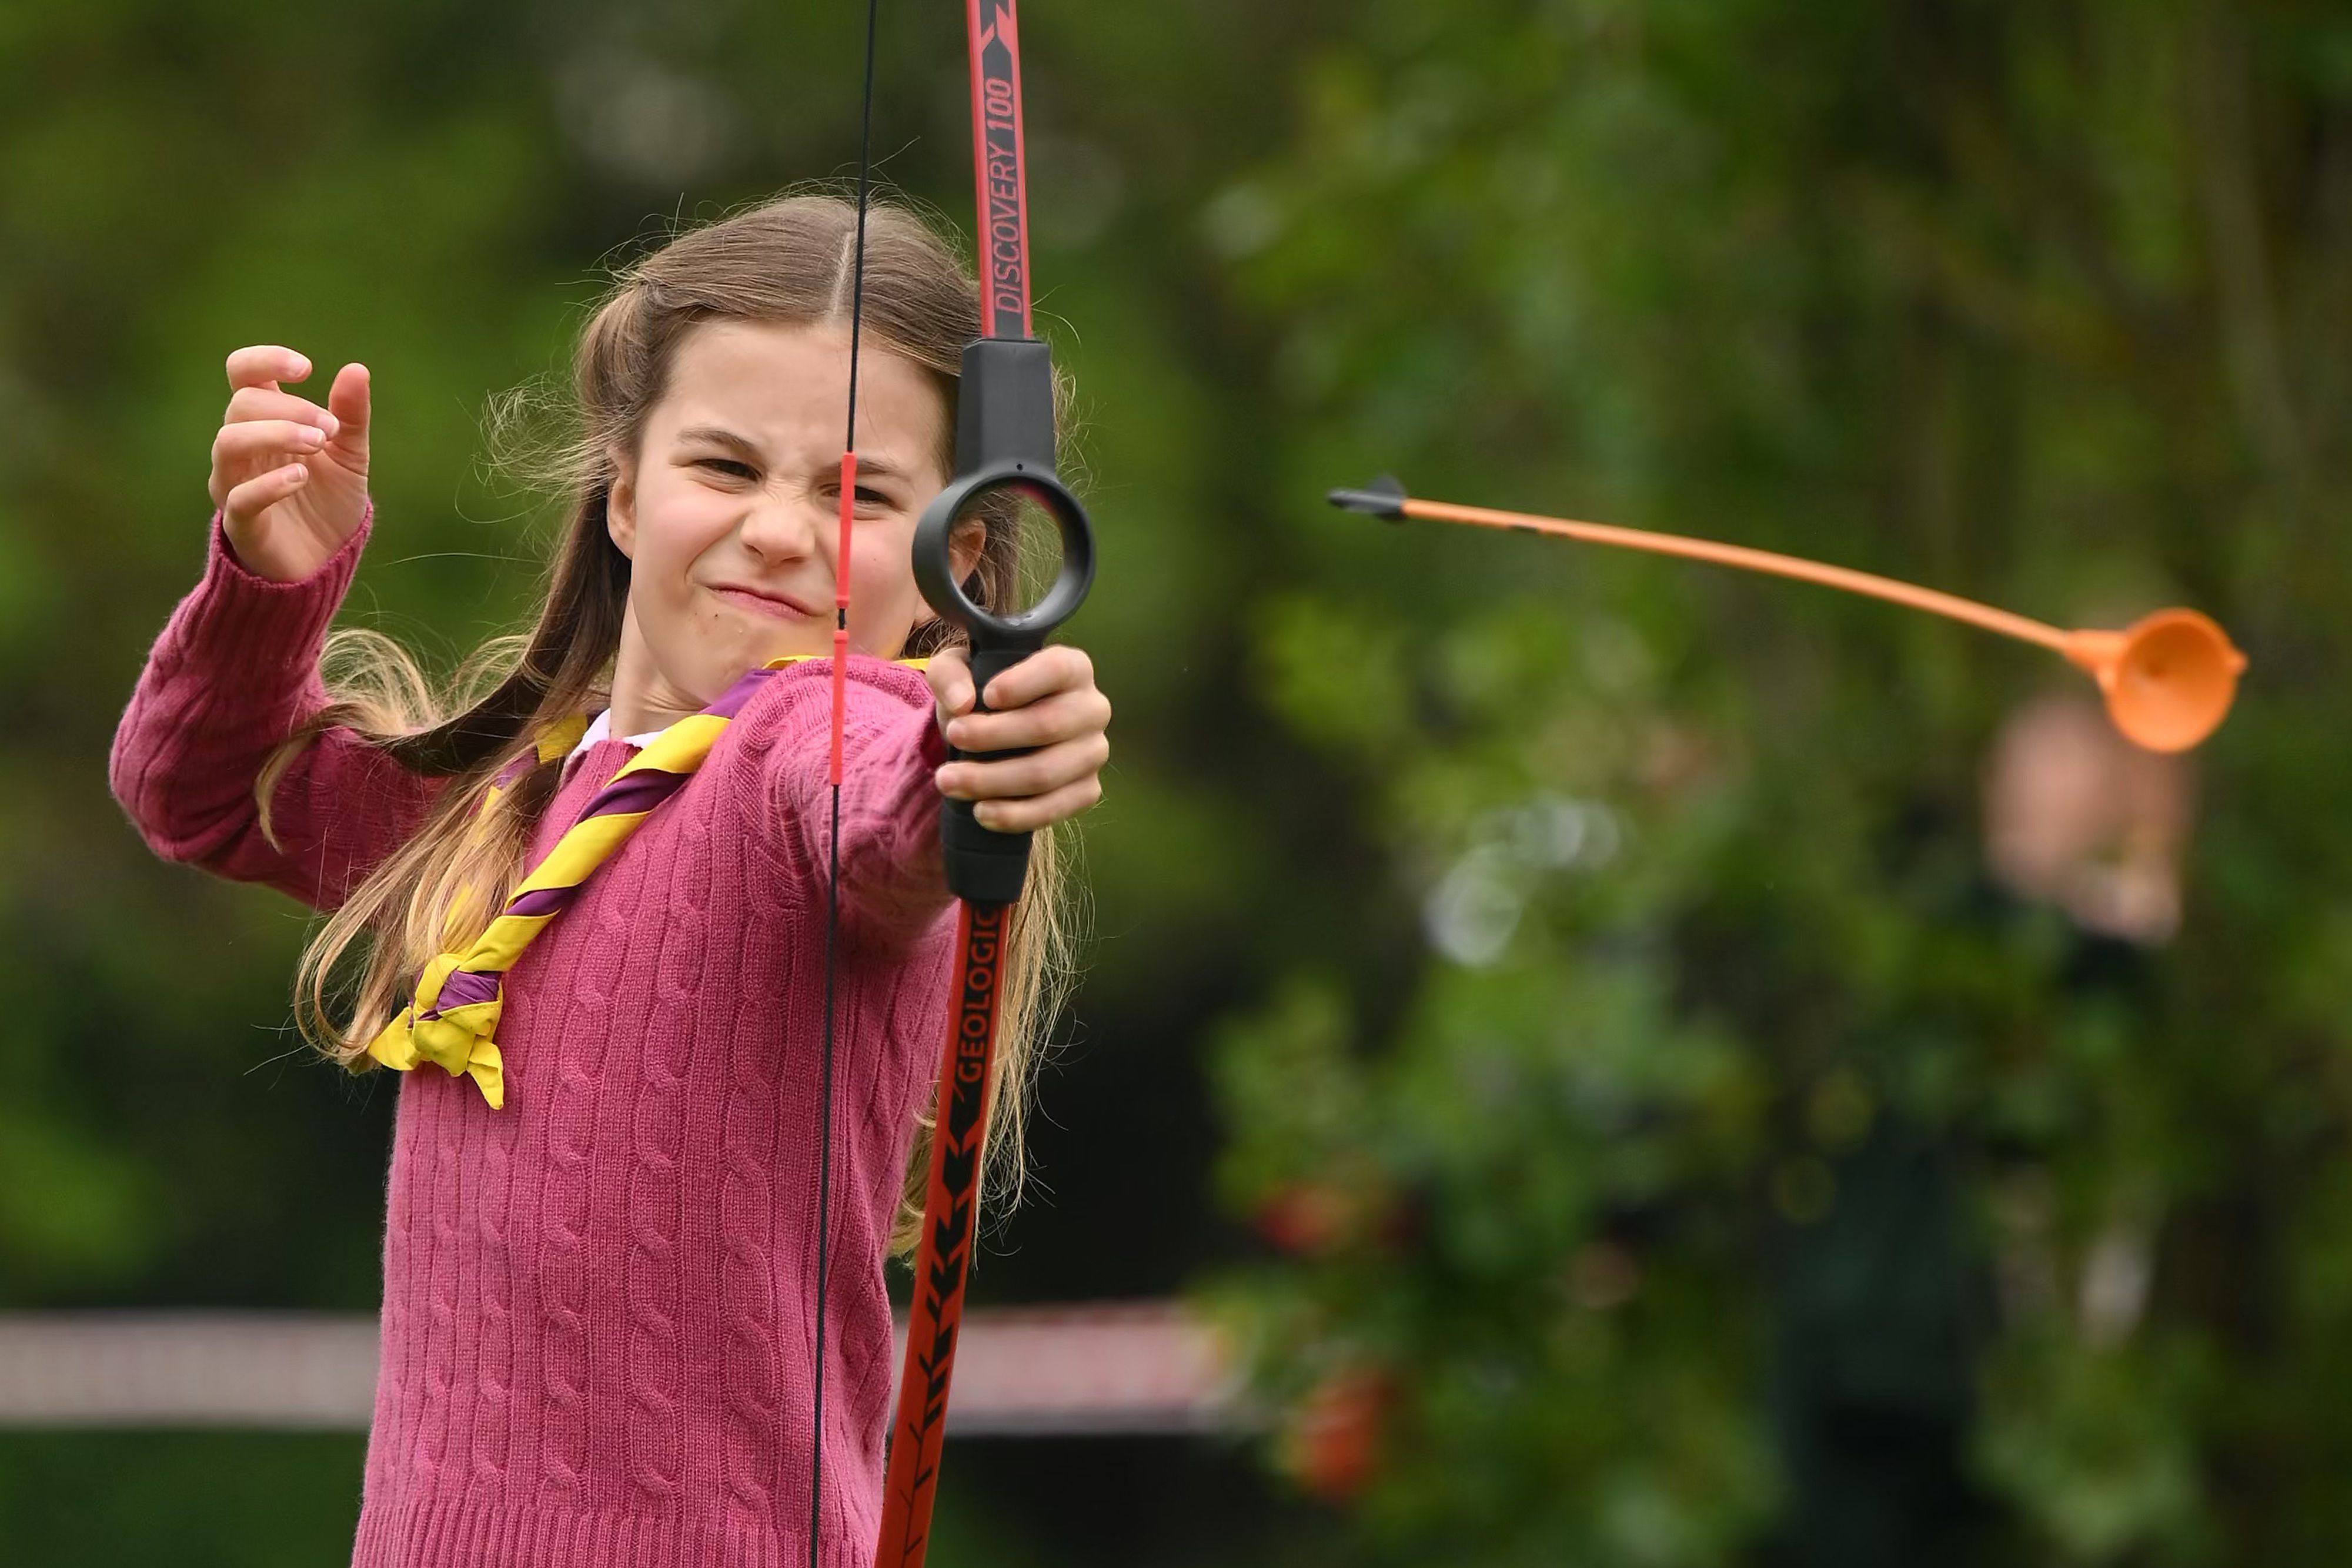 <p><span>Princess Charlotte tried her hand at archery while taking part in the Big Help Out volunteering drive -- the final event of grandfather King Charles III's </span><a href="https://www.wonderwall.com/celebrity/the-coronation-of-king-charles-iii-and-queen-camilla-the-best-pictures-of-all-the-royals-at-this-historic-event-735015.gallery">coronation</a><span> festivities -- during a visit to the 3rd Upton Scouts Hut in Slough, England, on May 8, 2023, where she and her siblings and parents helped to renovate and improve the building during their visit.</span></p>